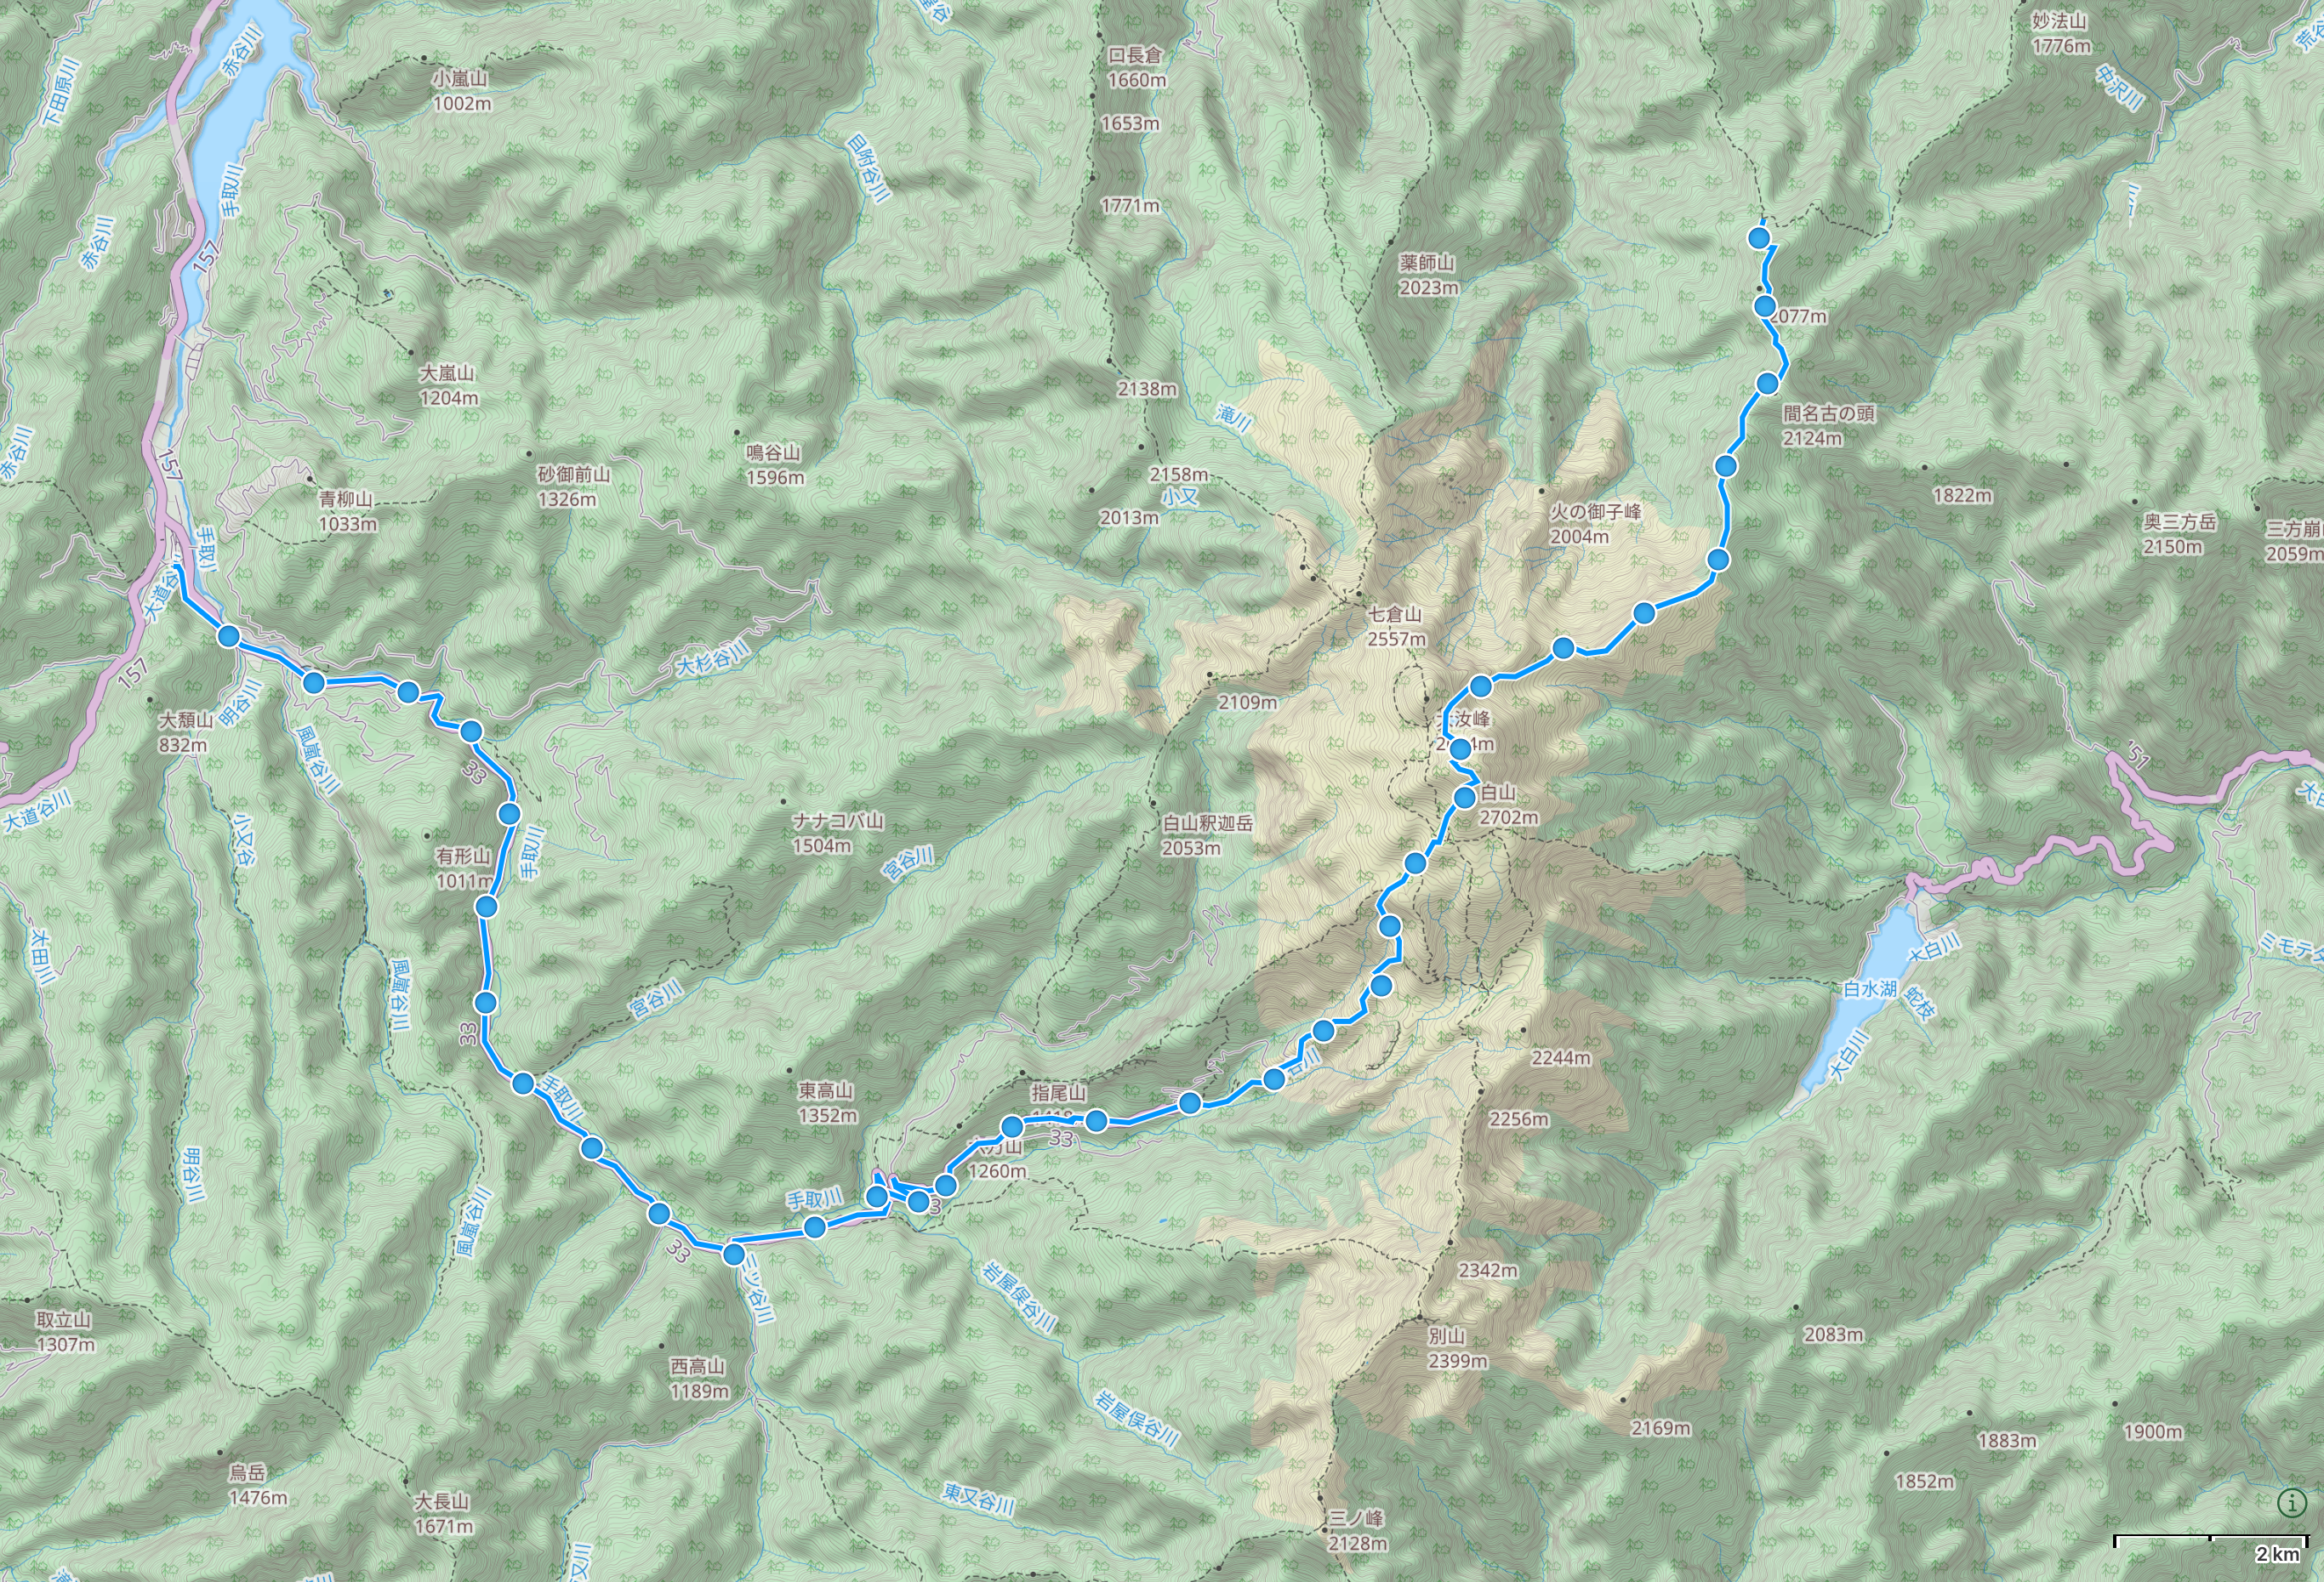 Map of the Hakusan region with author’s route across the mountain highlighted.